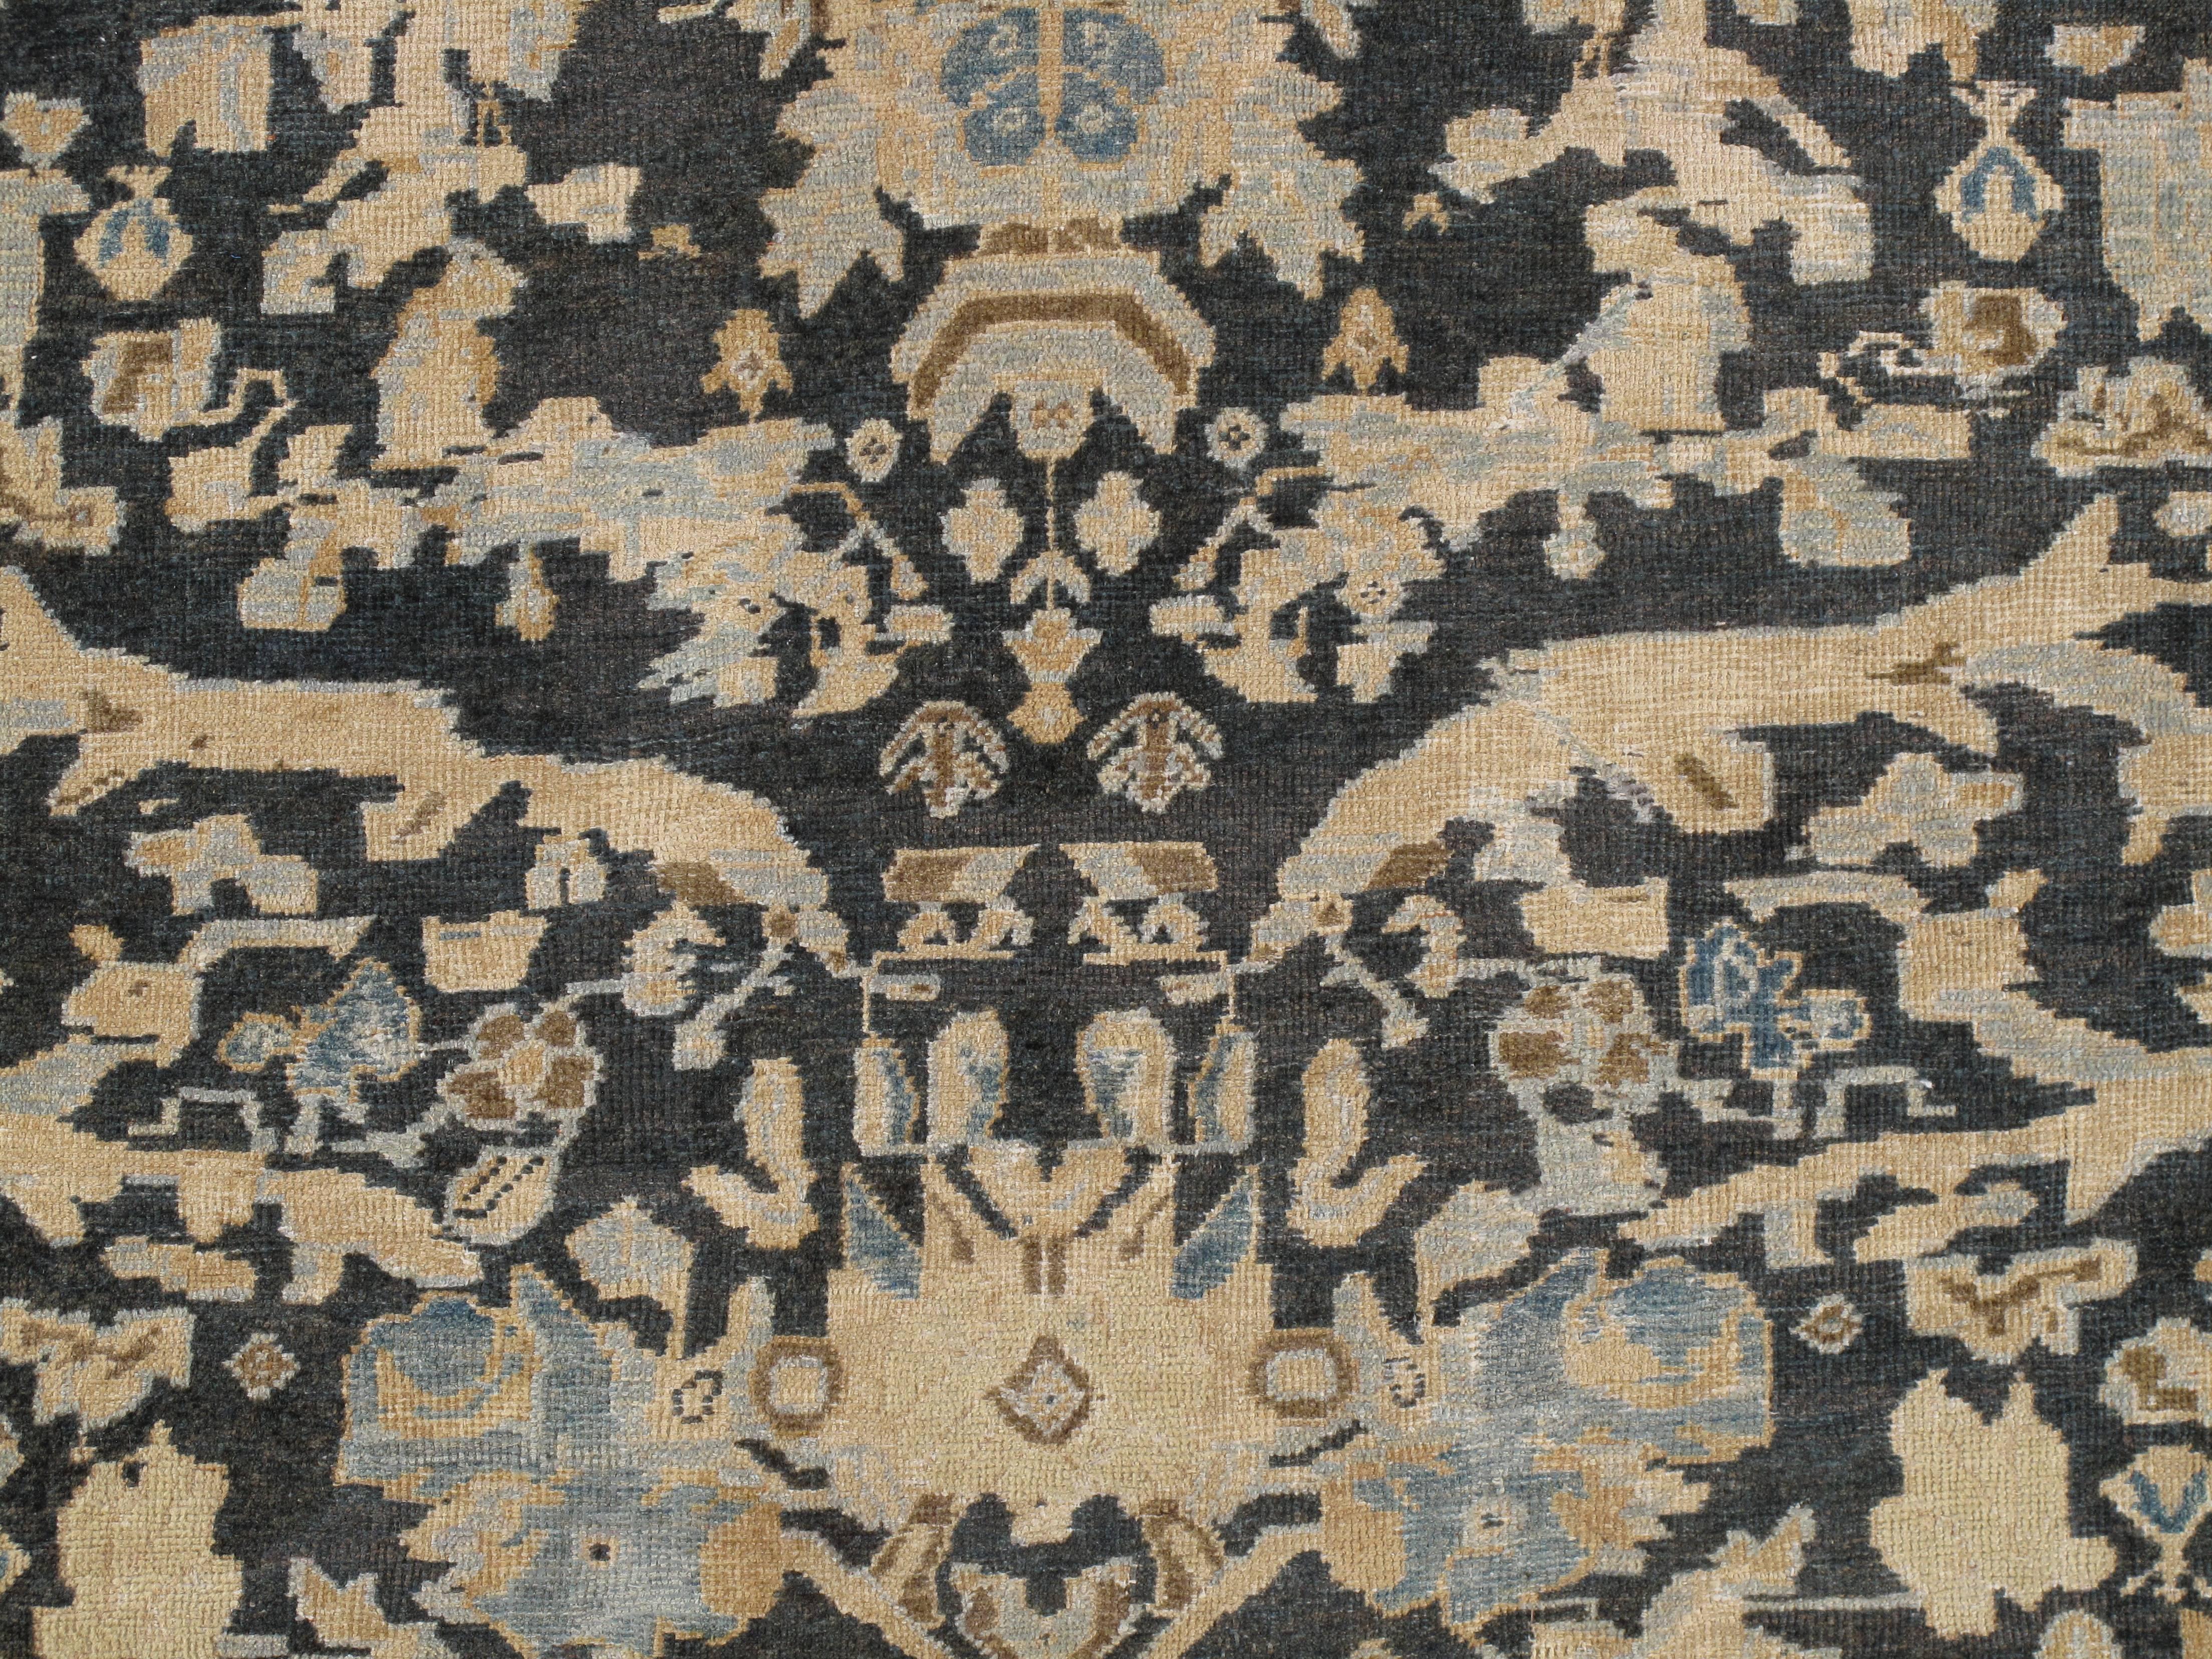 Persian Antique Sultanabad, Handmade Wool Rug, Grey Blue, Ivory, Navy, Tan, Light Blue For Sale